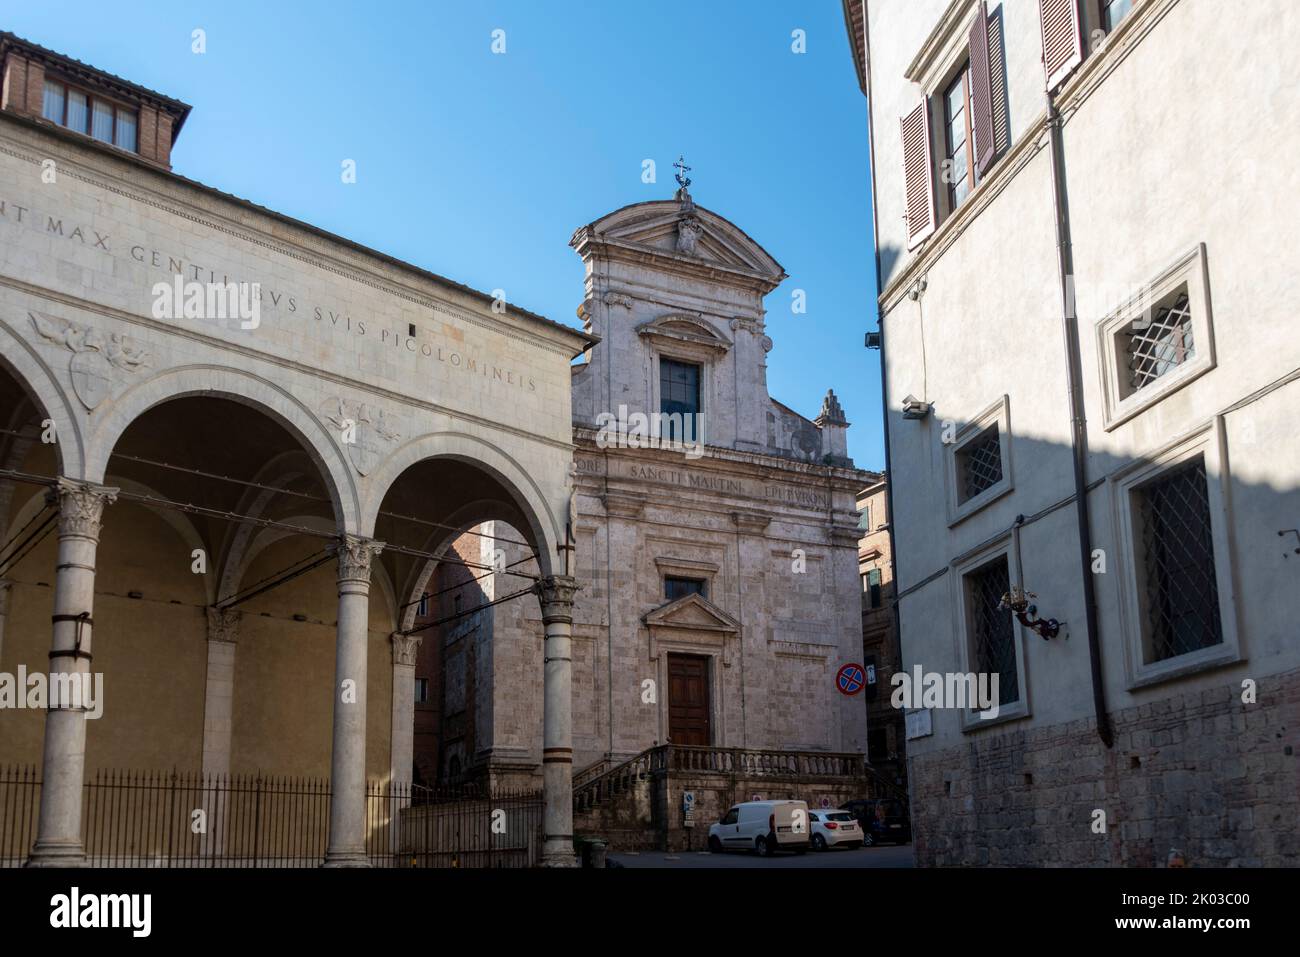 Chiesa di San Martino, dedicated to St. Martin of Tours, is one of the oldest churches in Siena, Tuscany, Italy Stock Photo